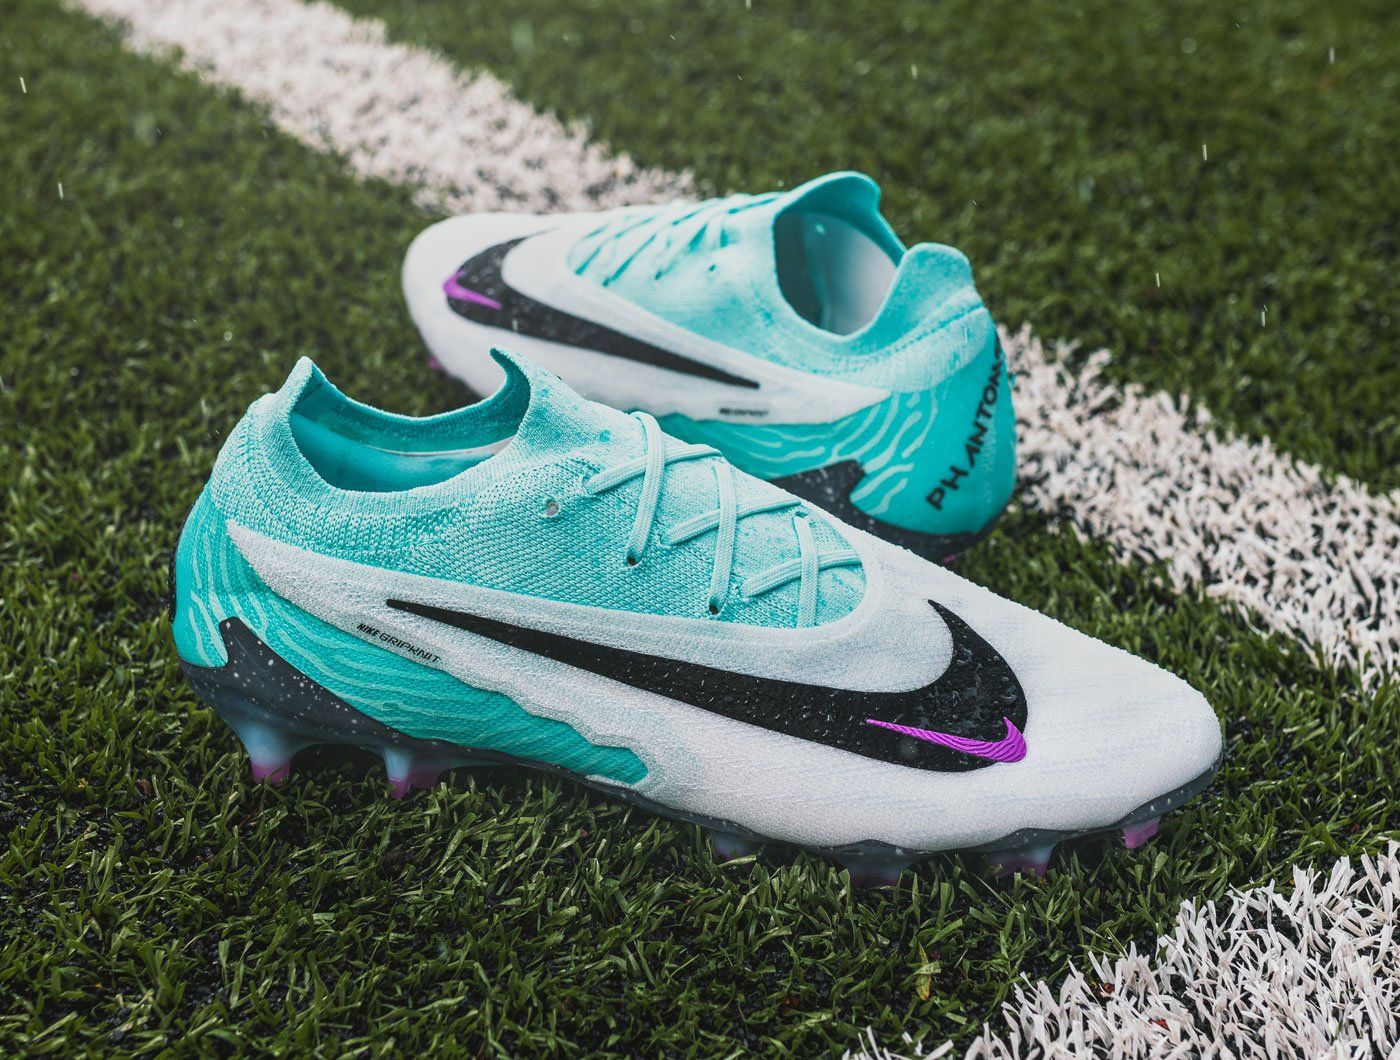 Best Indoor Football And Soccer Shoes 2023 - The Sport Review